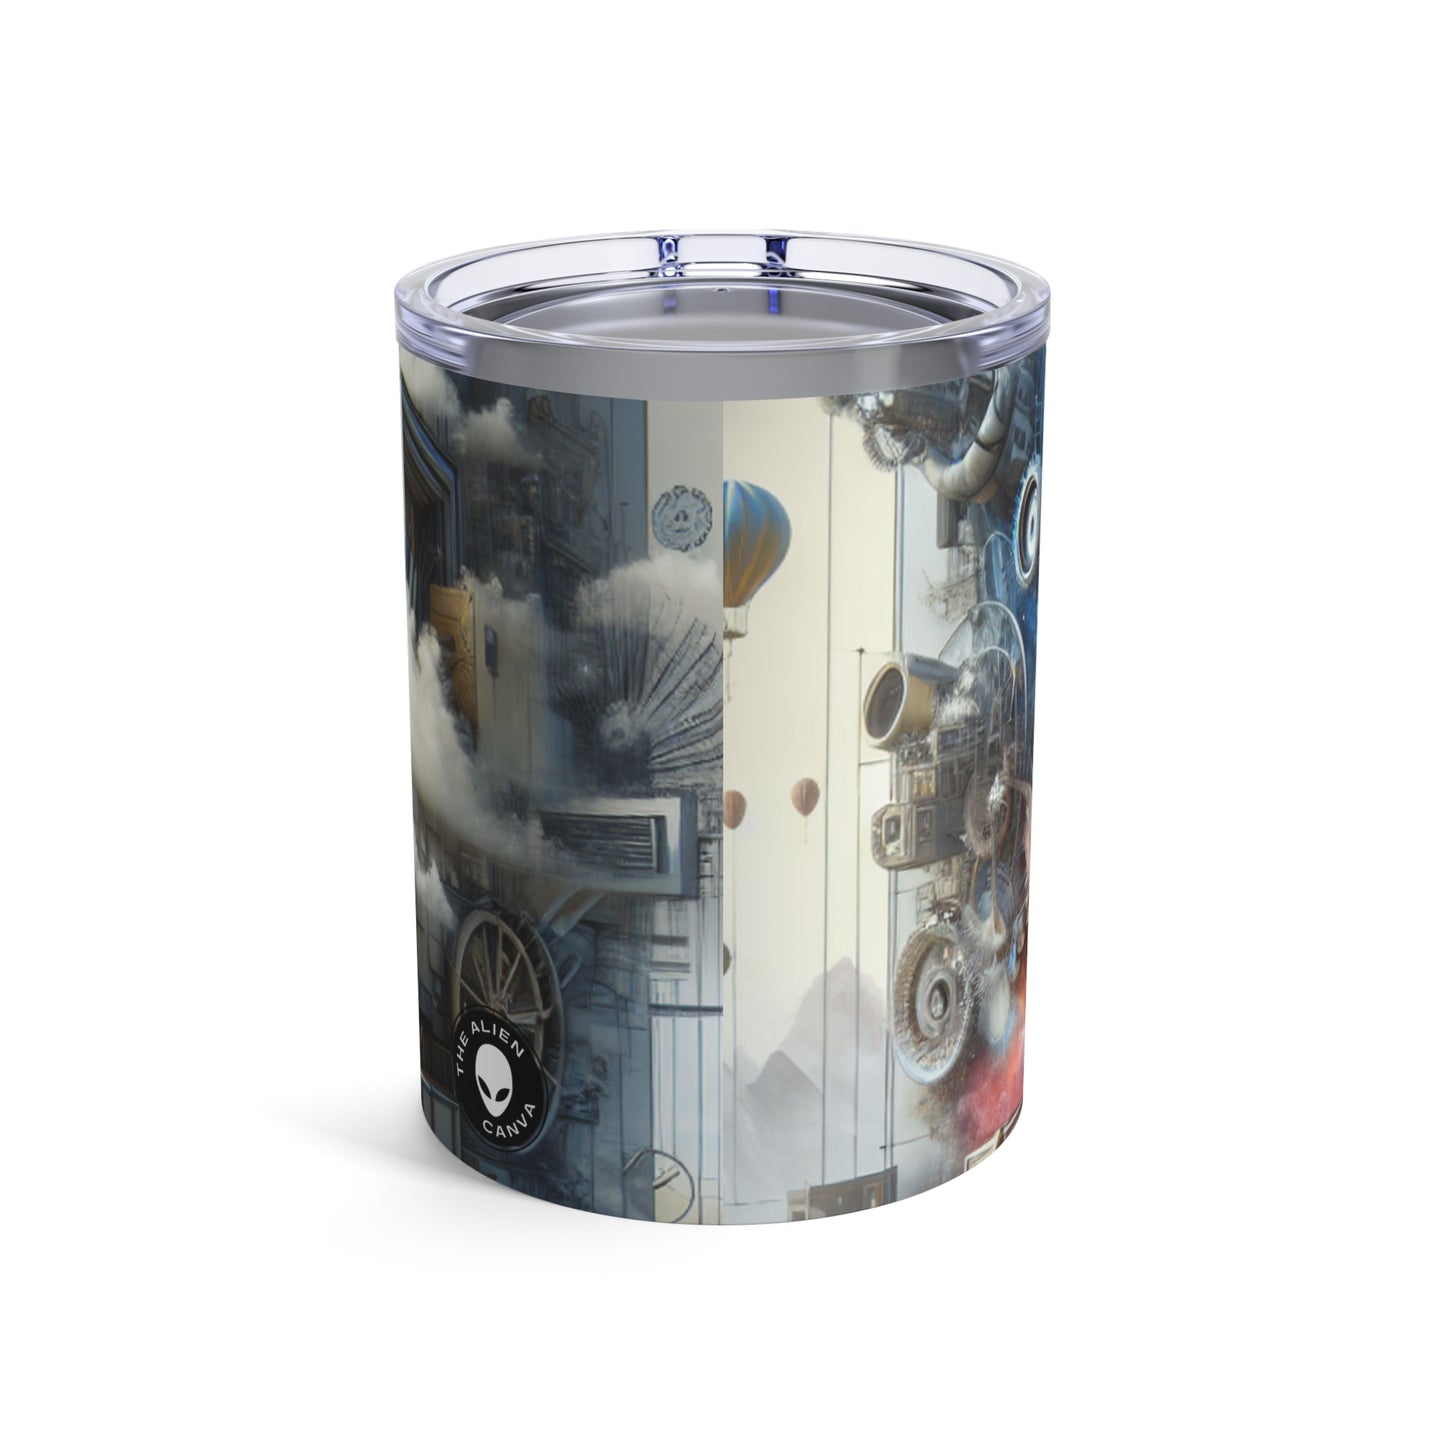 "Symbolic Transformations: Conceptual Realism in Everyday Objects" - The Alien Tumbler 10oz Conceptual Realism